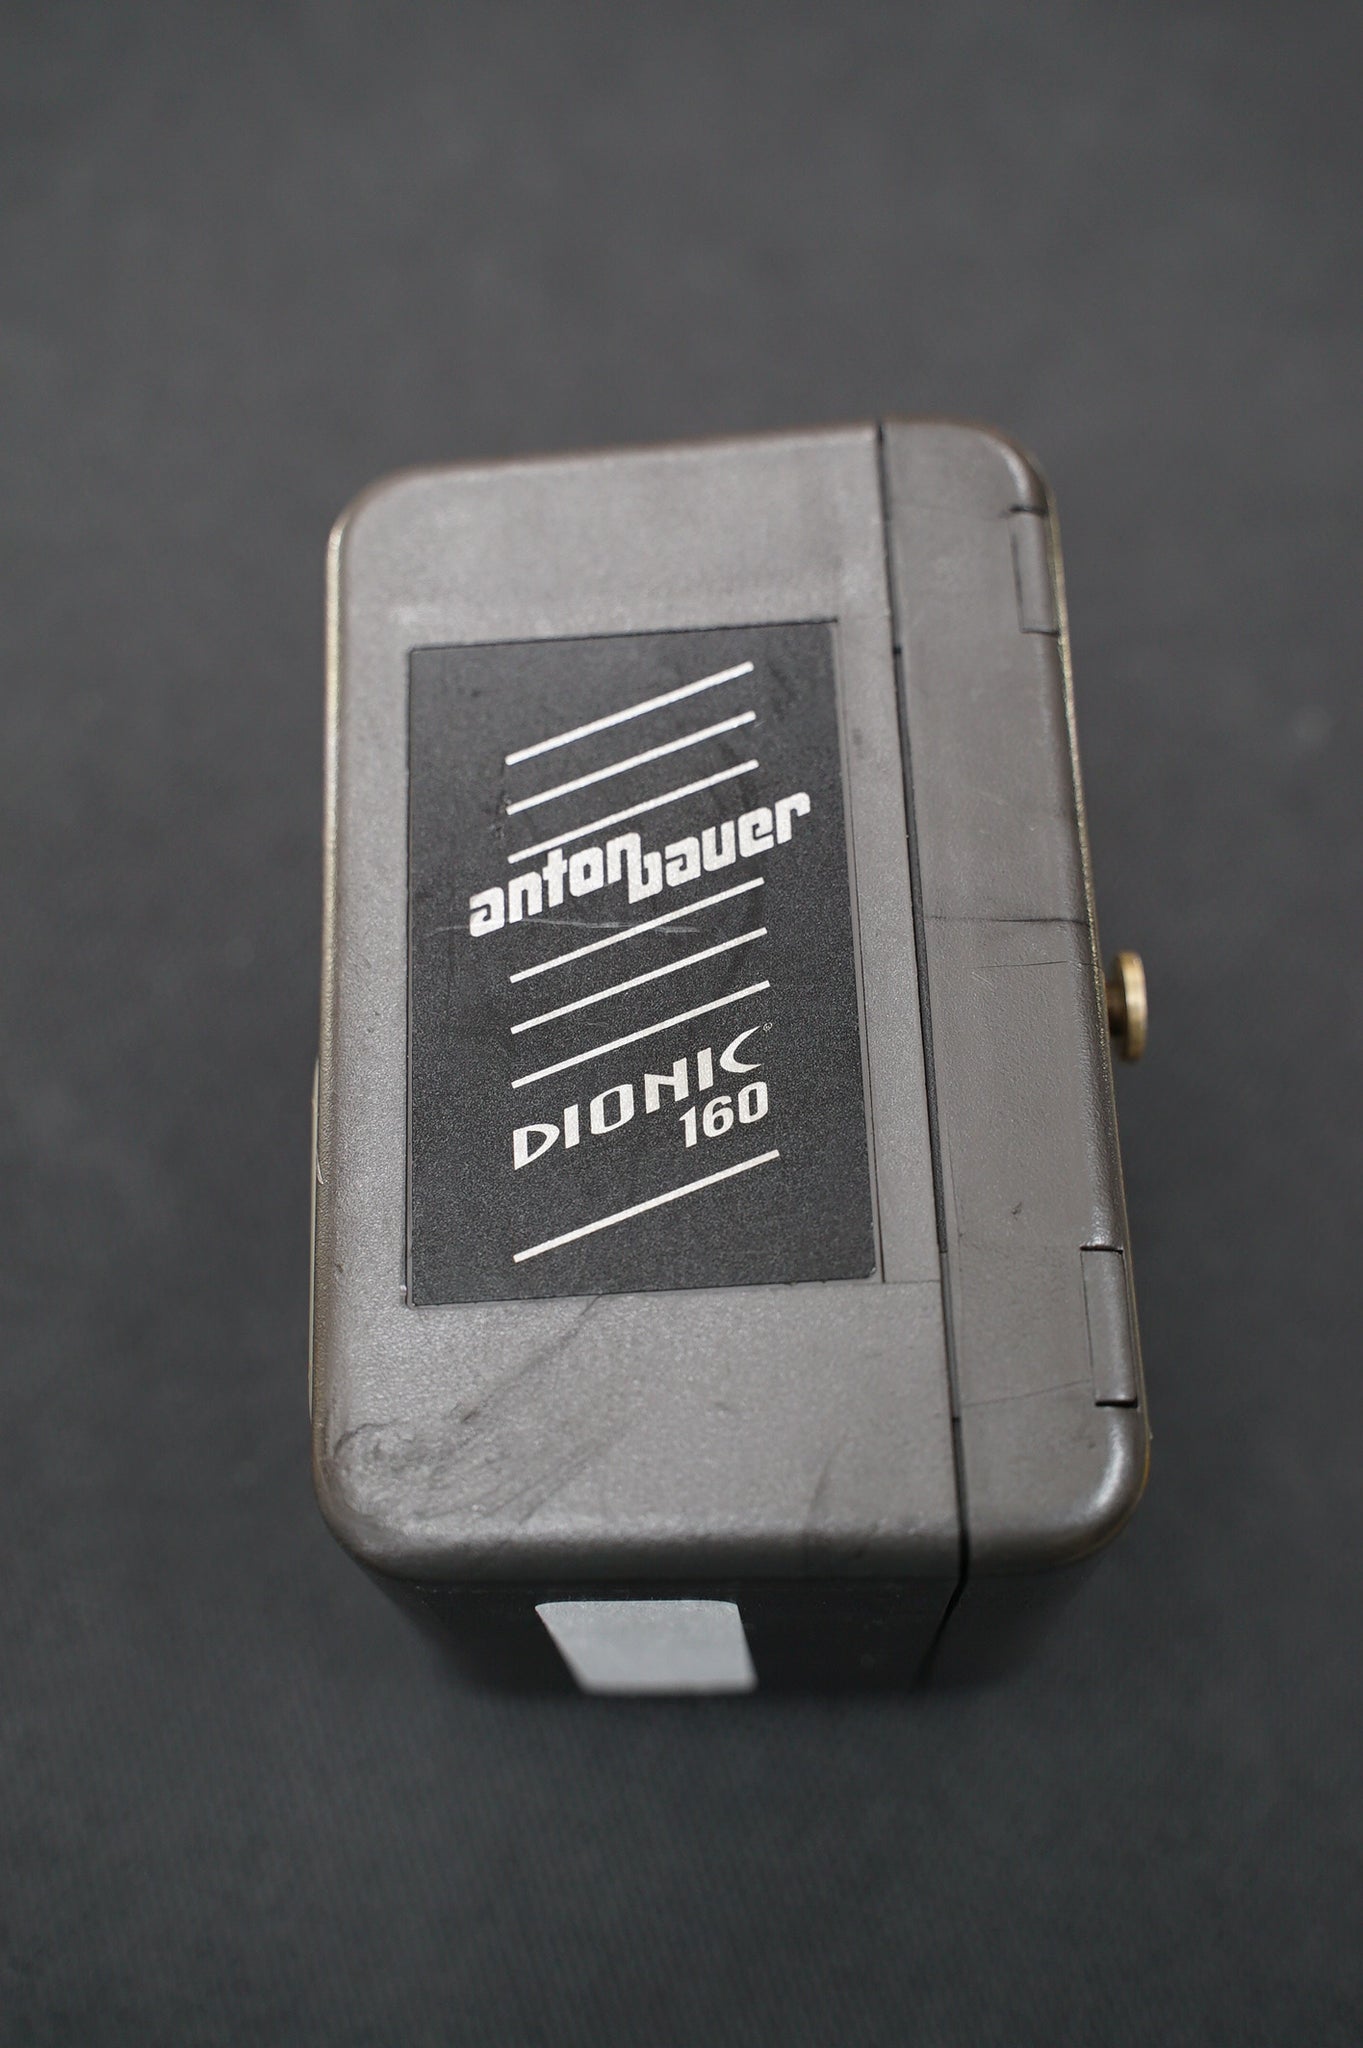 Anton Bauer Dionic 160 Battery, Used